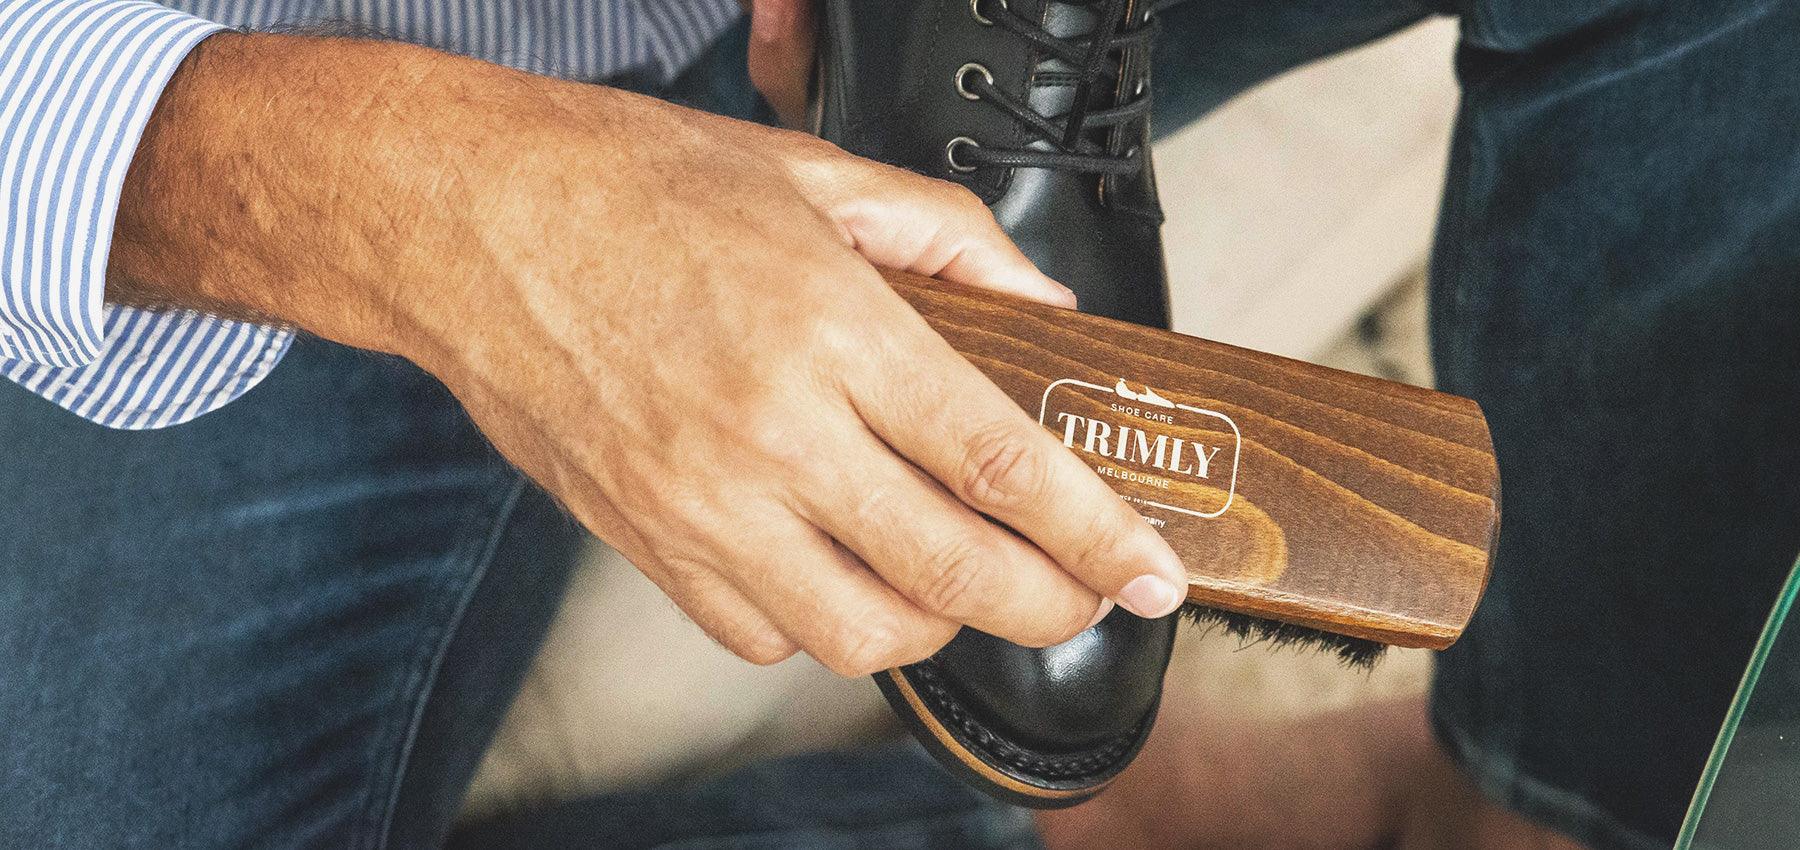 Shoe Care Tools - Trimly